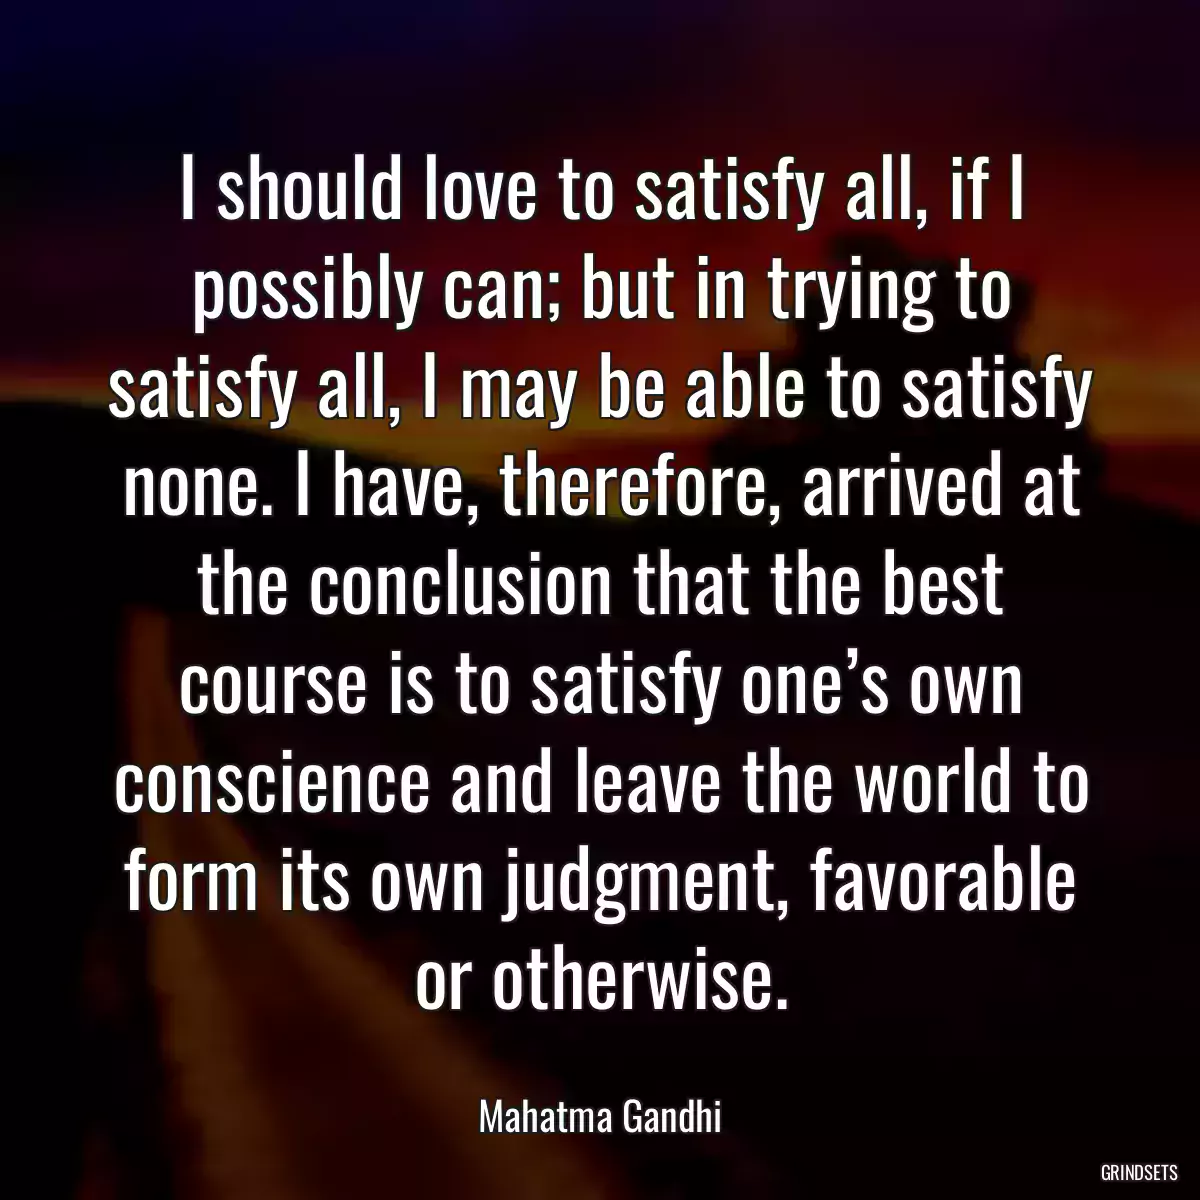 I should love to satisfy all, if I possibly can; but in trying to satisfy all, I may be able to satisfy none. I have, therefore, arrived at the conclusion that the best course is to satisfy one’s own conscience and leave the world to form its own judgment, favorable or otherwise.